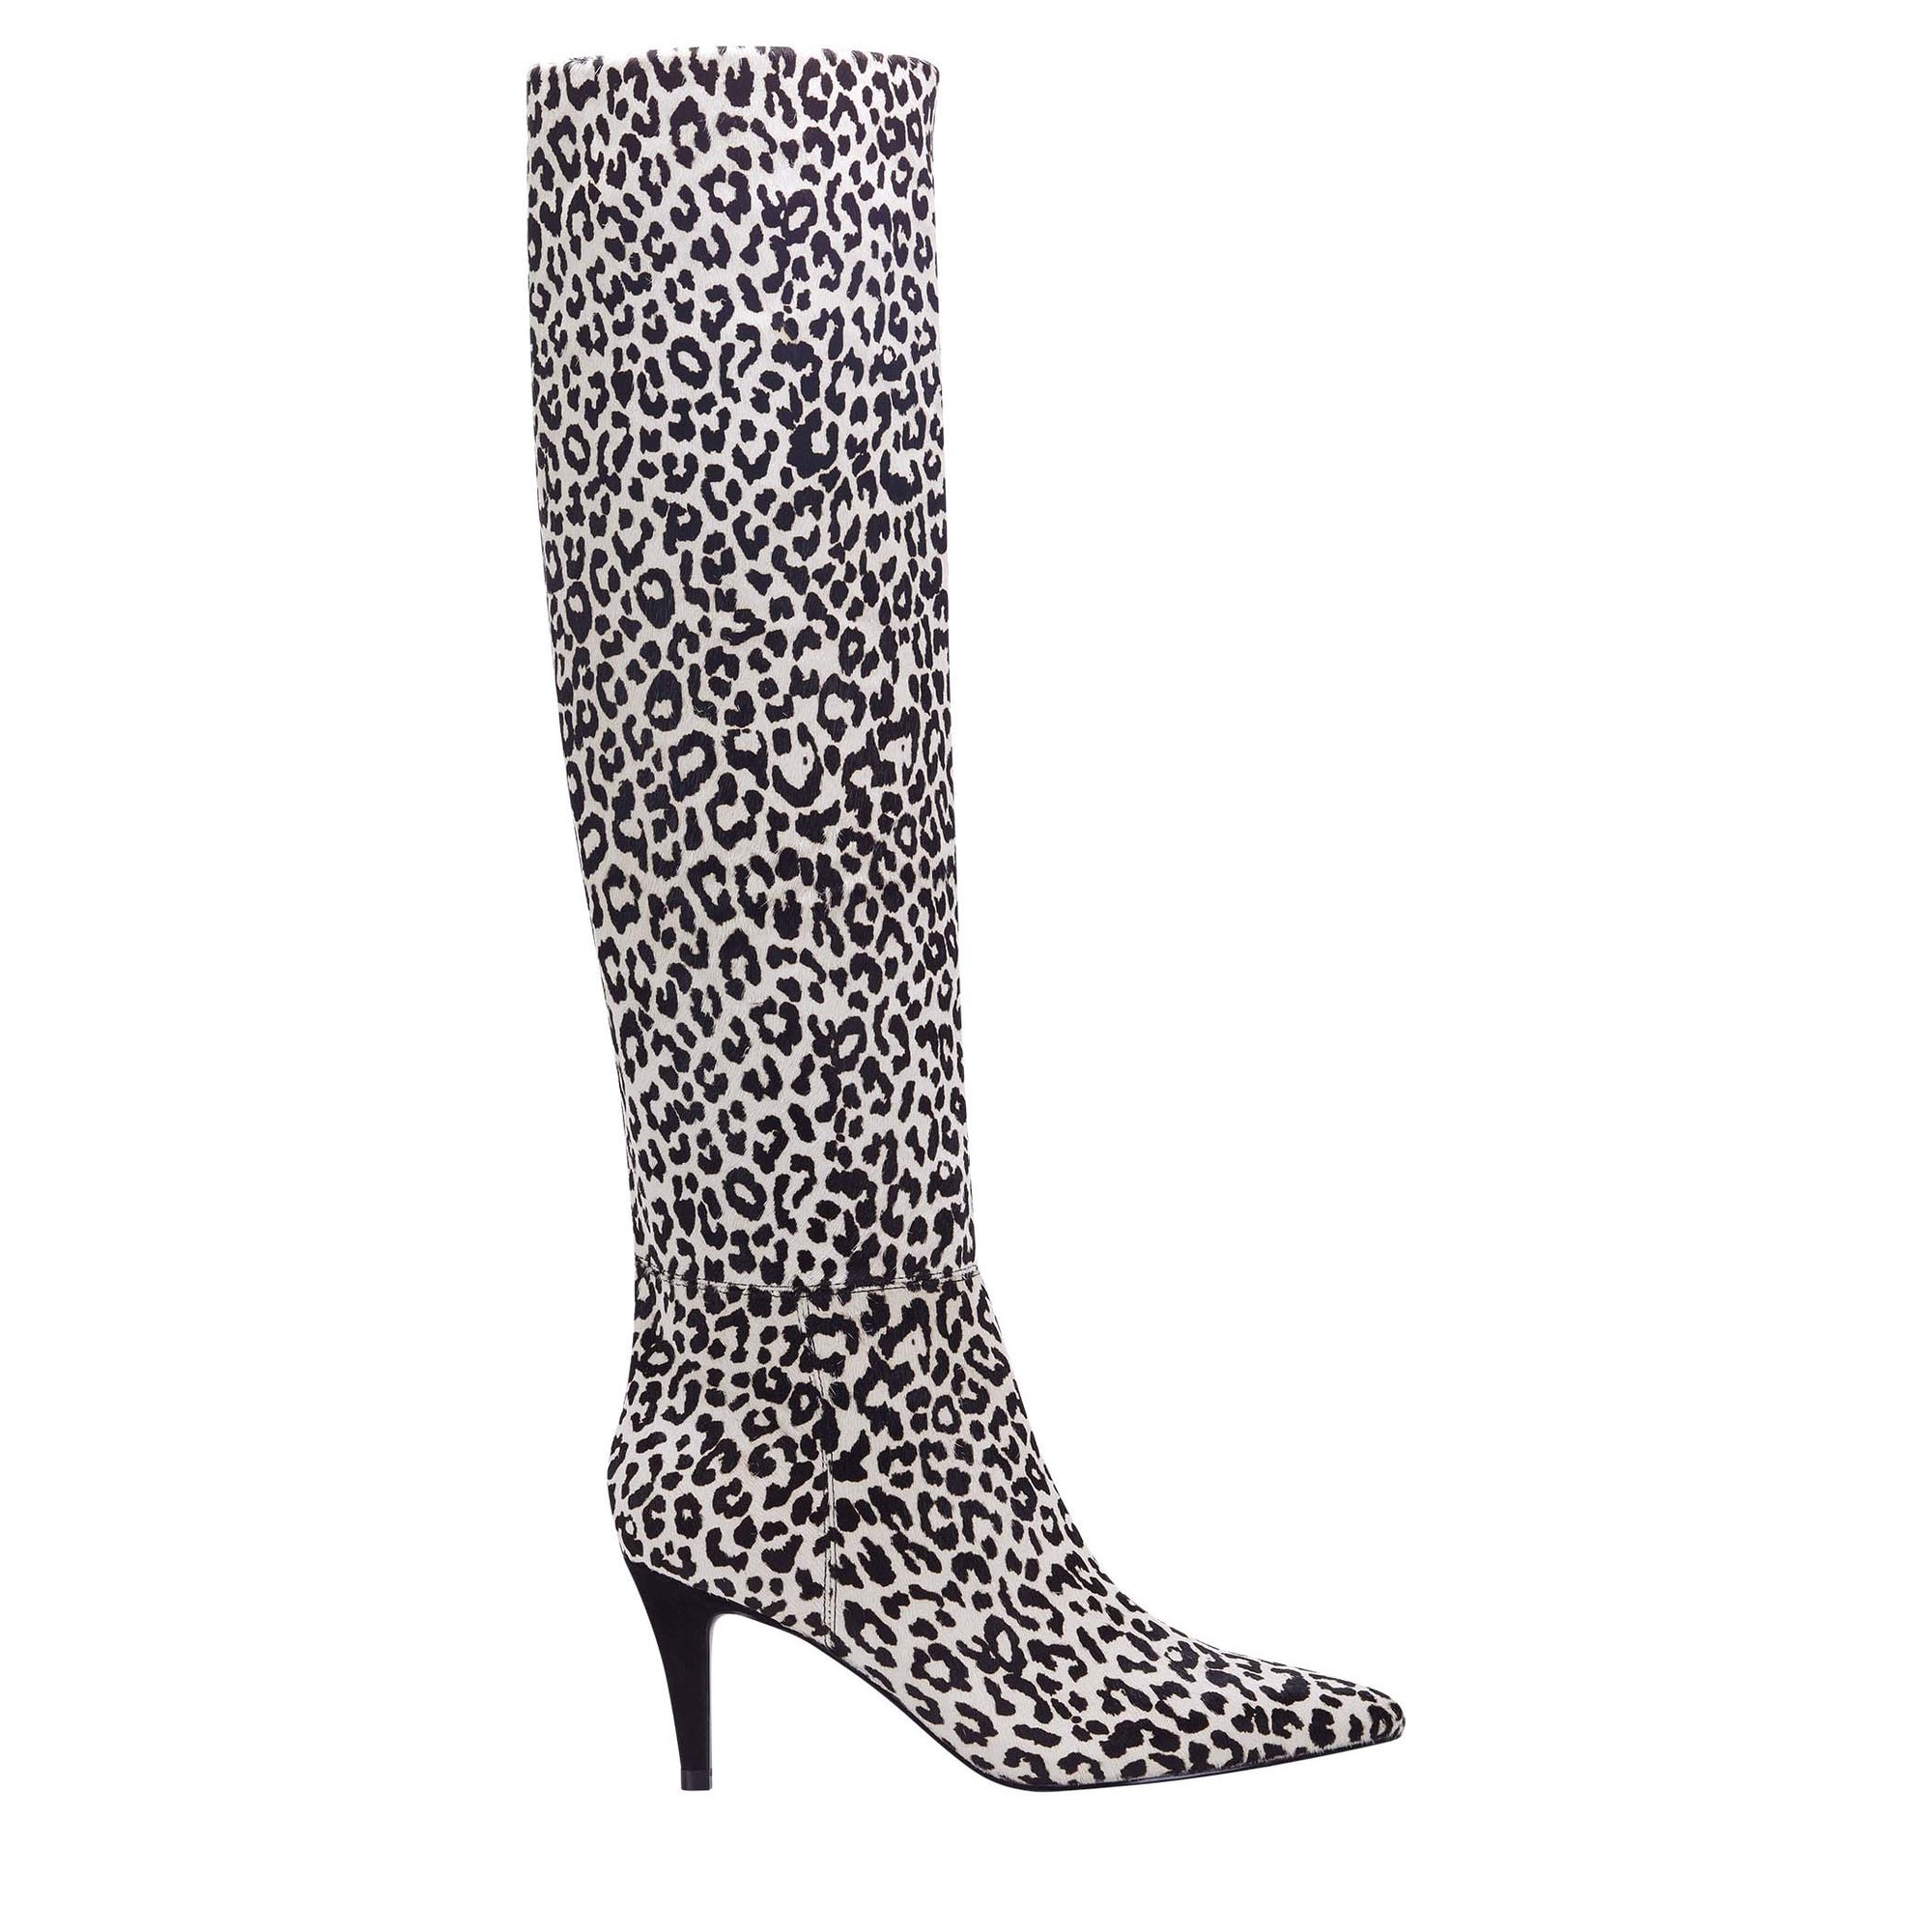 marc fisher black knee high boots